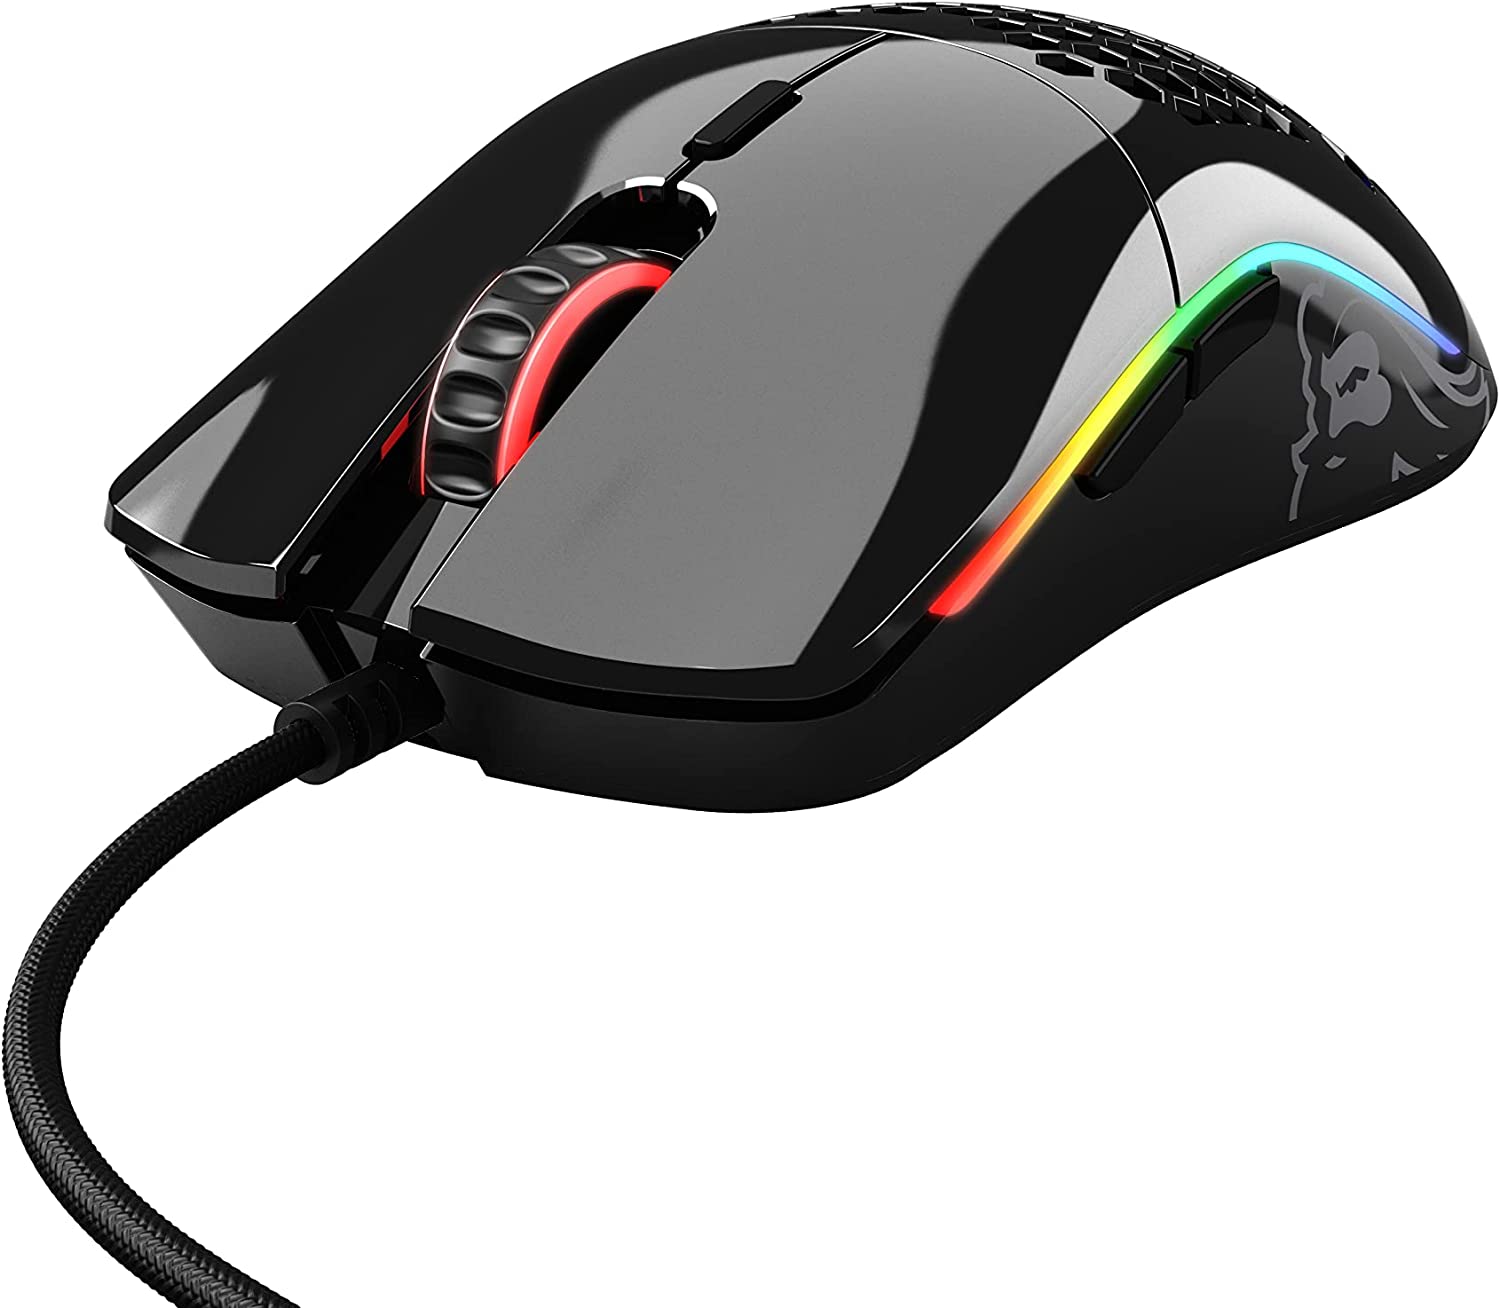 GLORIOUS MODEL O GLOSSY BLACK WIRED MOUSE - GO-GBLACK-N